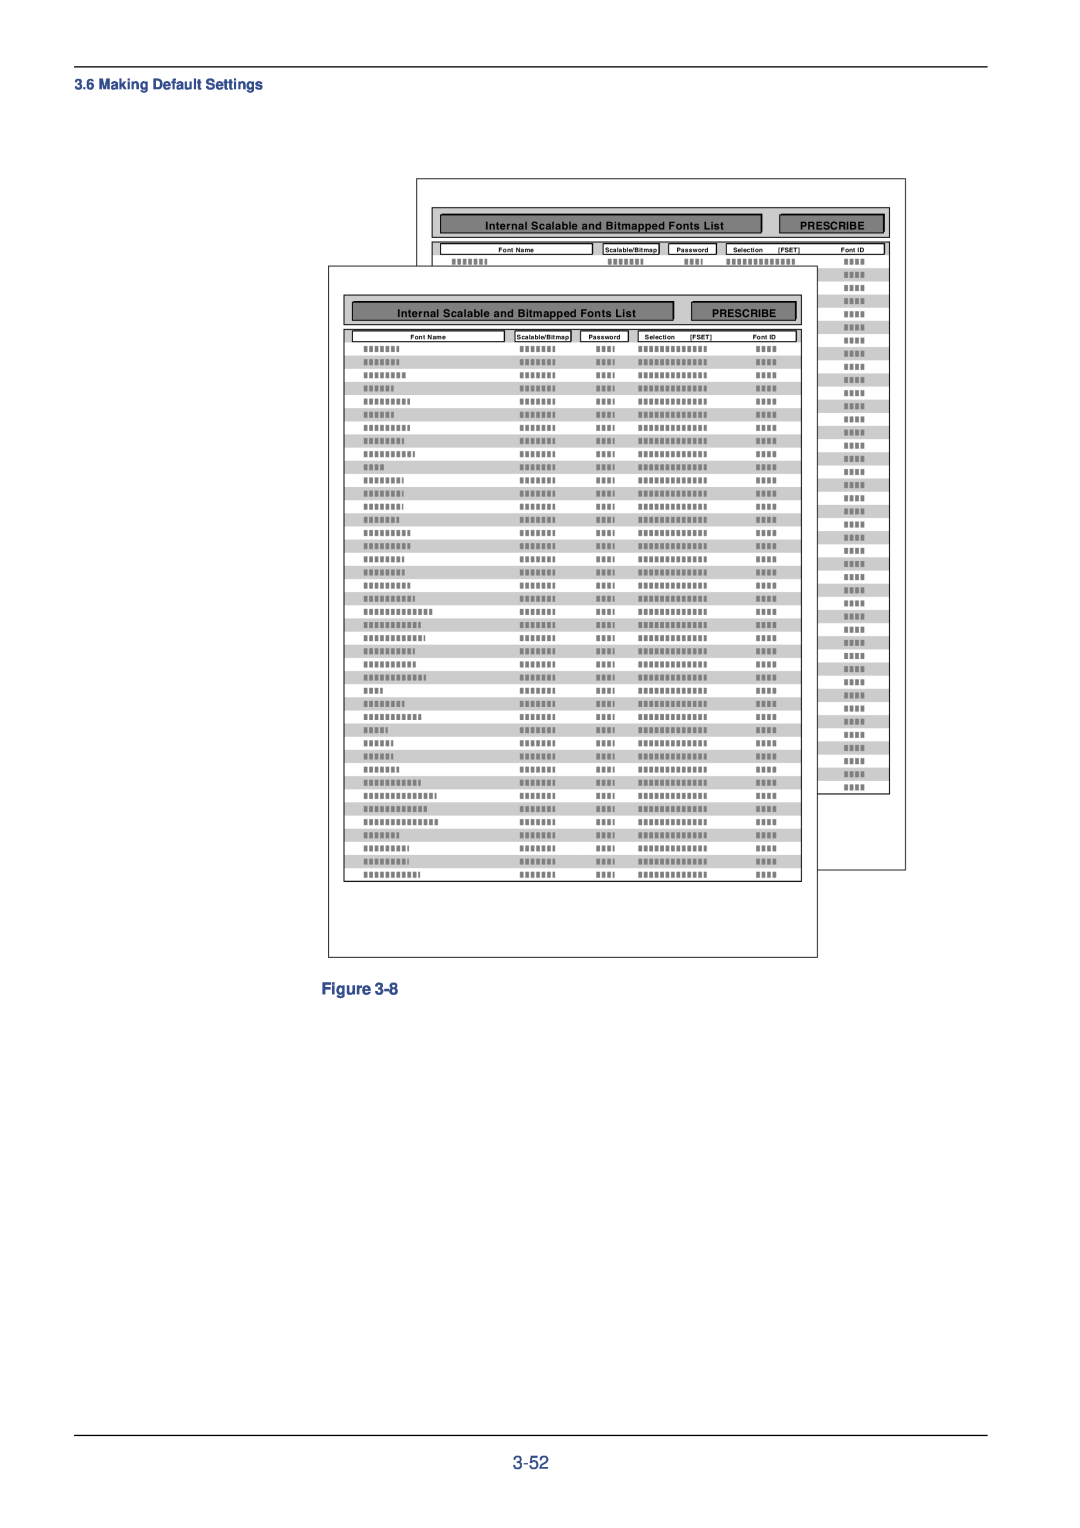 Xerox FS-C8008DN, FS-C8008N manual 3-52, Making Default Settings, Internal Scalable and Bitmapped Fonts List, Prescribe 